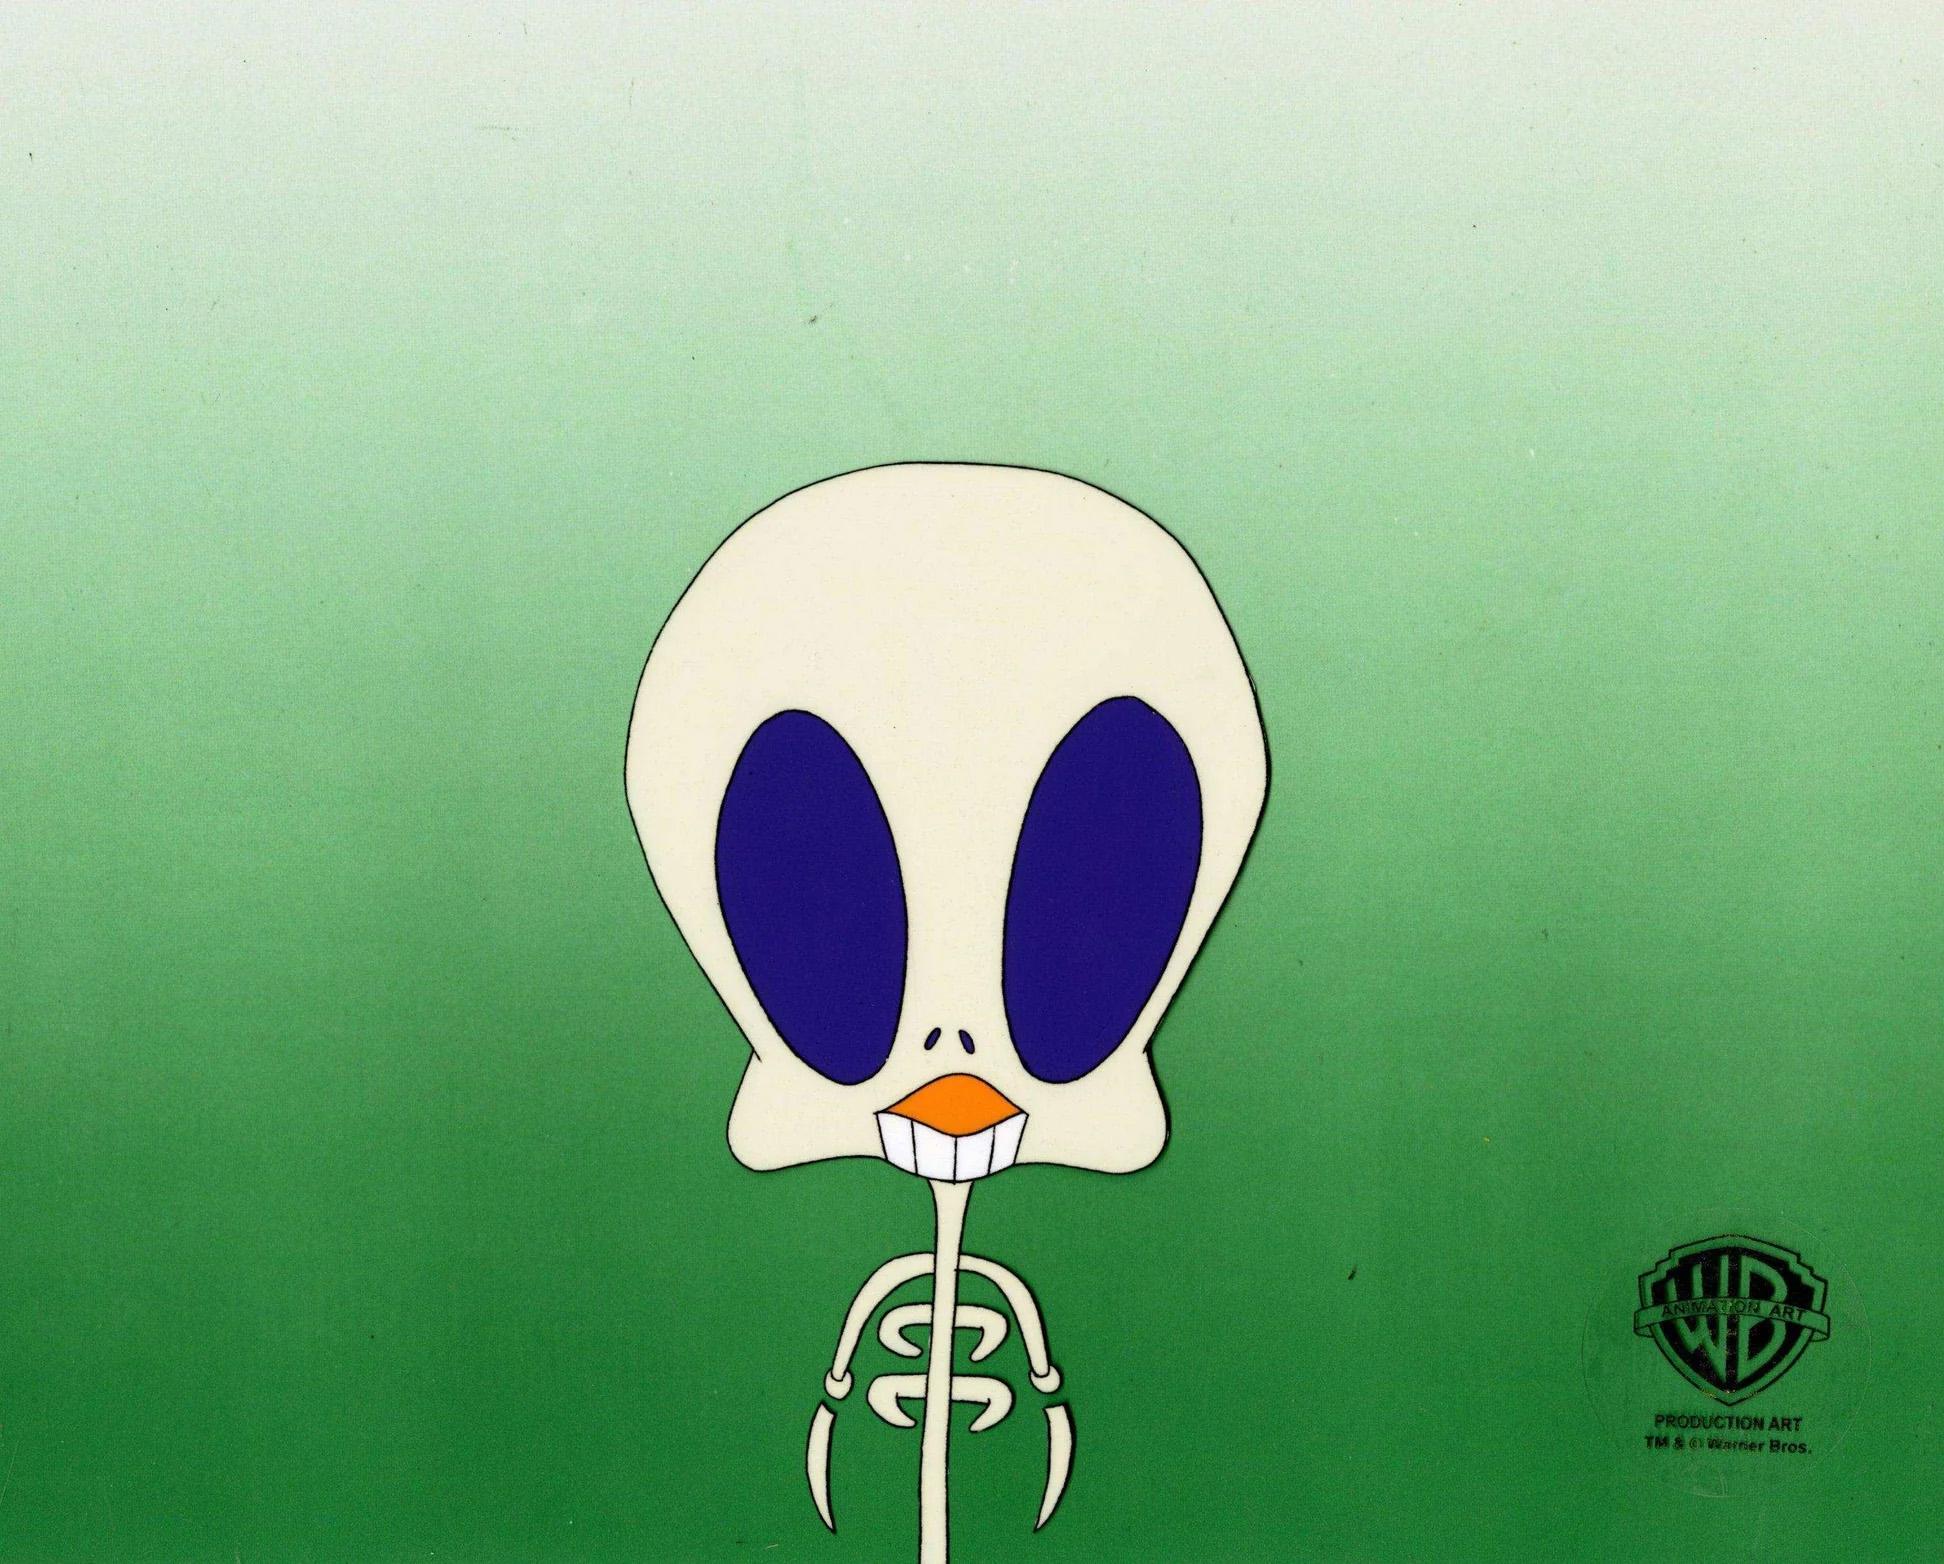 Looney Tunes Original Production Cel with Matching Drawing: Tweety - Art by Looney Tunes Studio Artists